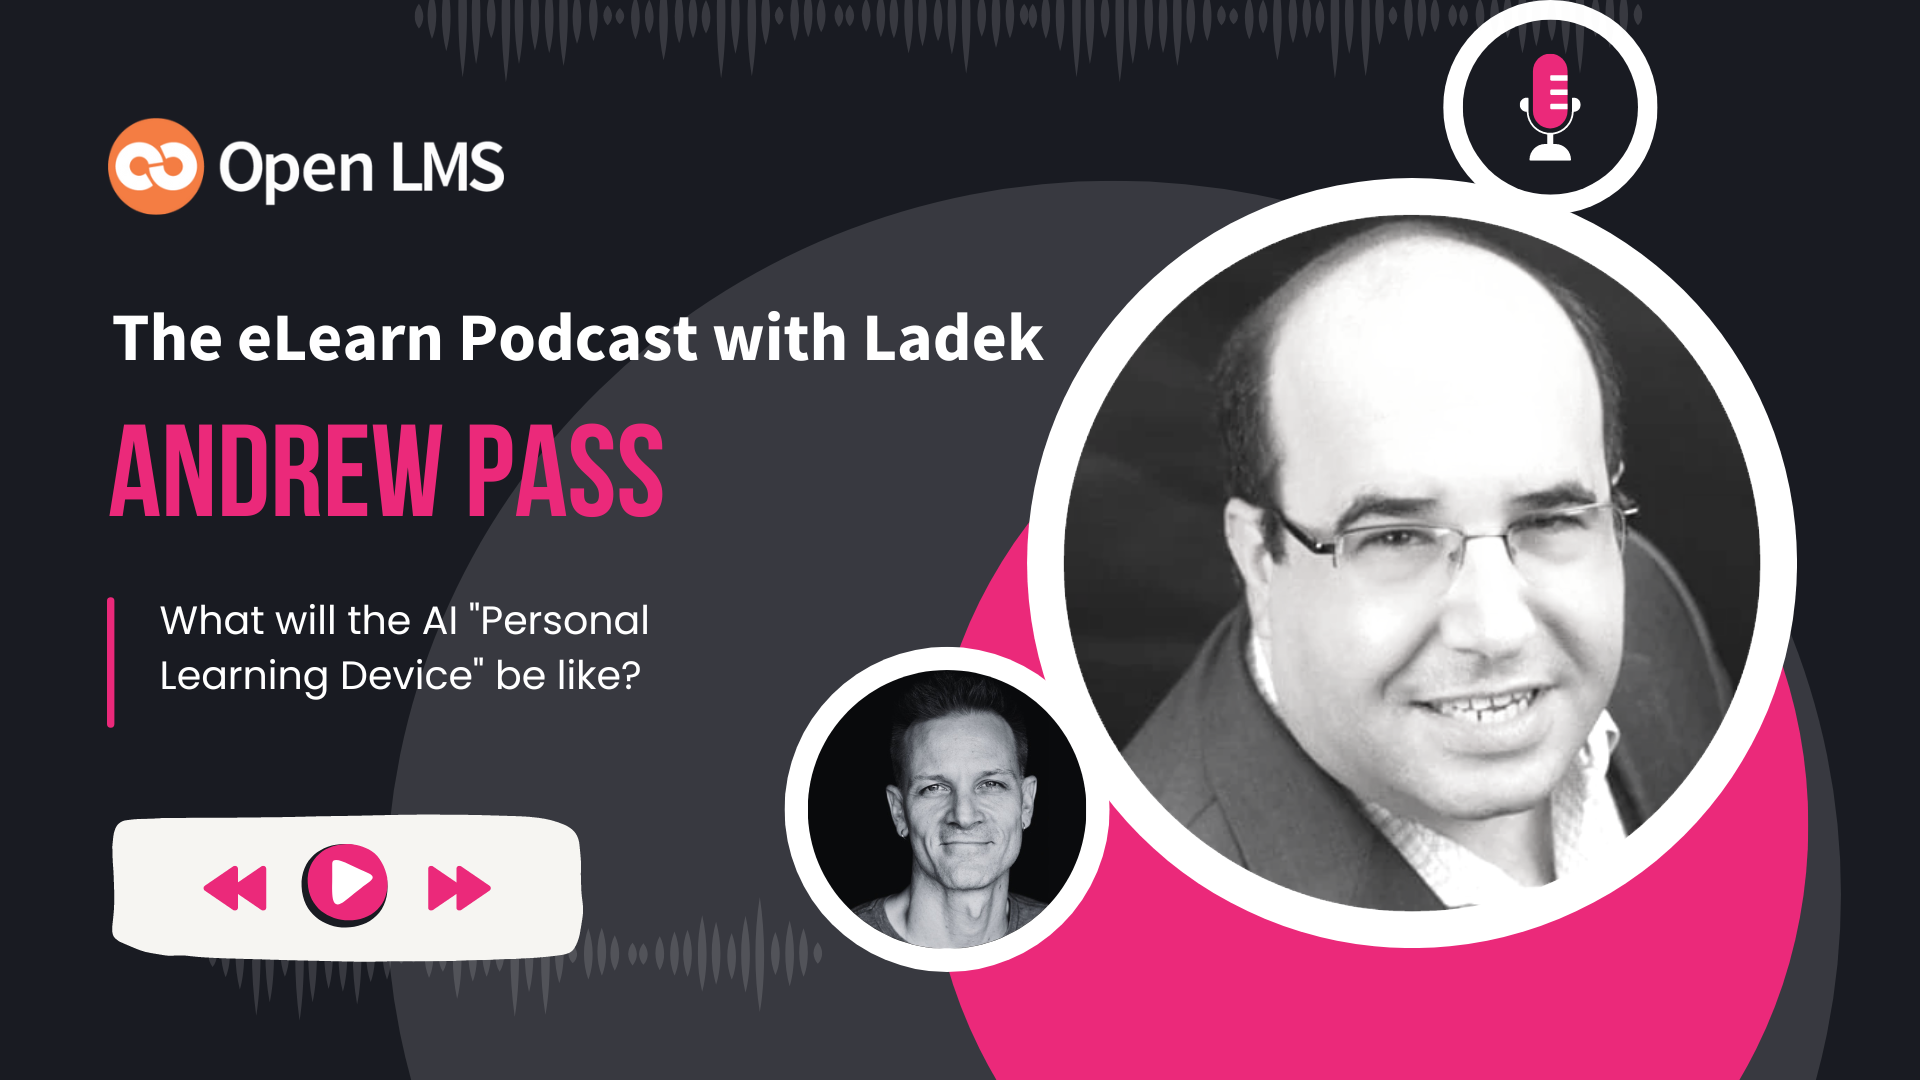 PODCAST eLearning Experts from all over the world chat with Ladek on the eLearn Podcast — Incredible stories, actionable tips, lifelong advice